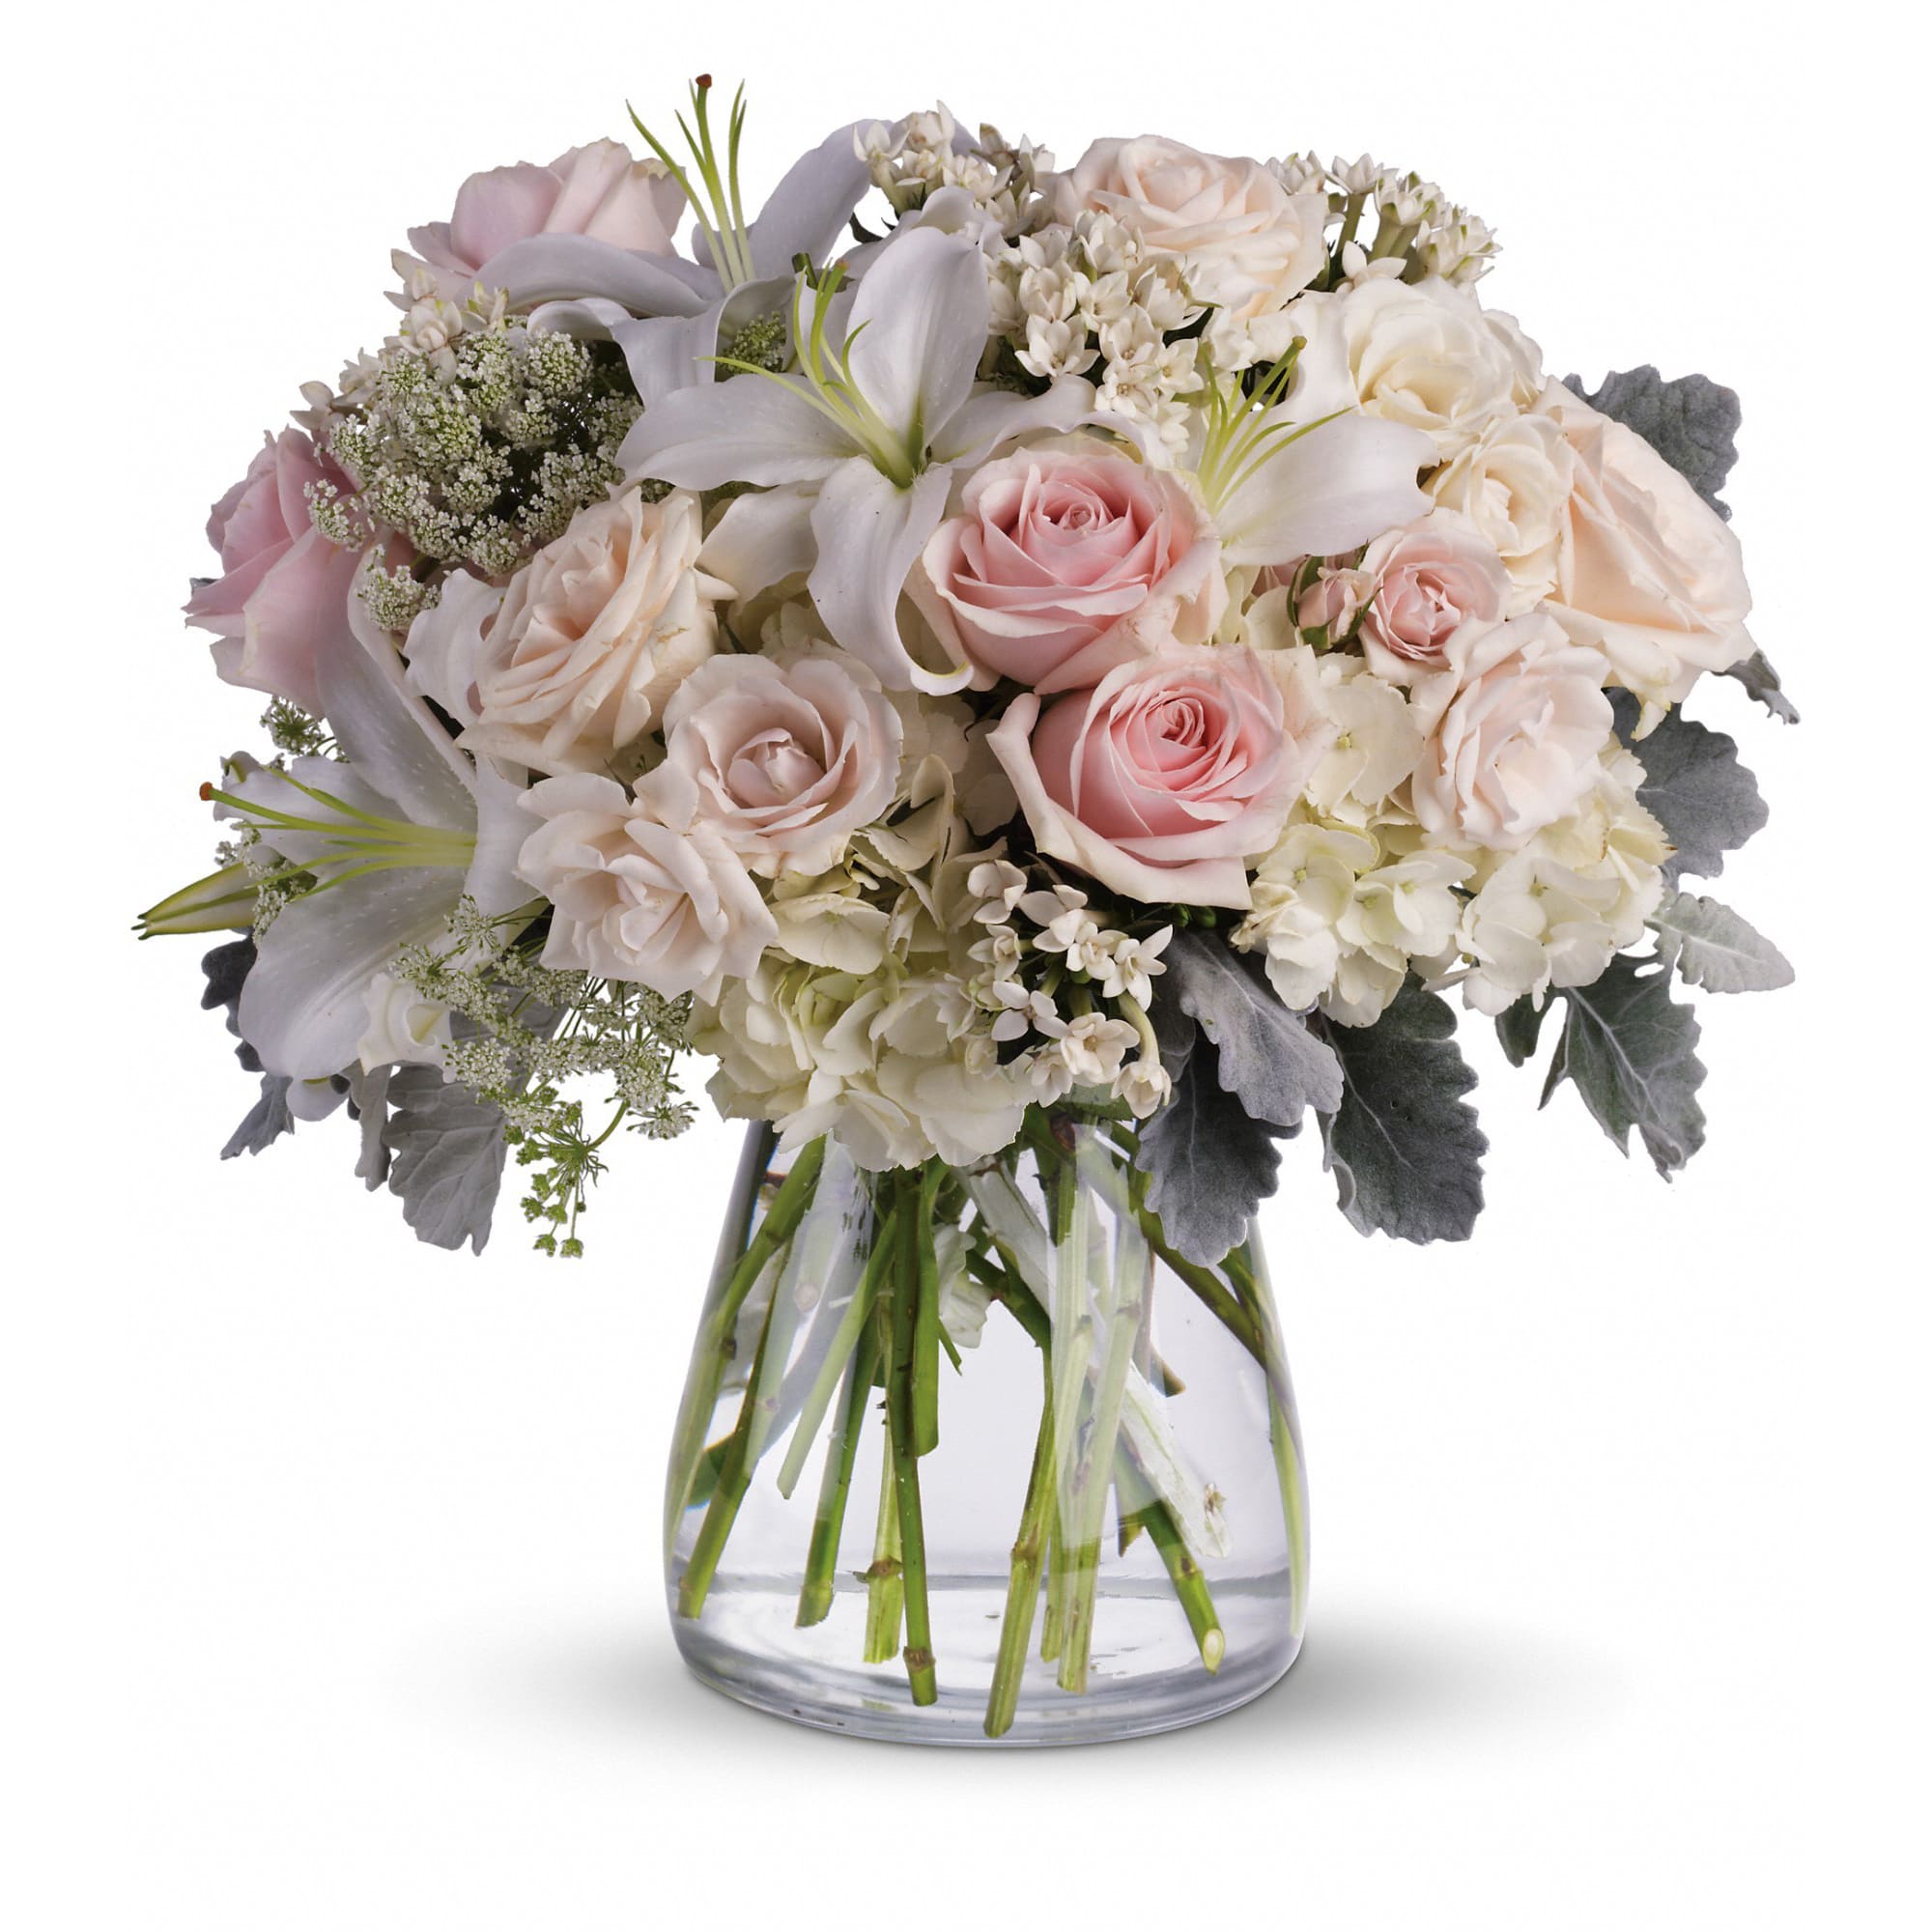 Beautiful Whisper by Teleflora - A whisper-quiet affirmation of love. Subtle shadings of pink and white roses, lilies and delicate Queen Anne's lace in a simple, elegant vase.  Gorgeous flowers such as white, crème and light pink roses, white oriental lilies and delicate Queen Anne's lace with a touch of silvery dusty miller, all in a classic hurricane vase.  Approximately 15 1/2&quot; W x 15 1/2&quot; H  Orientation: All-Around      As Shown : T237-1A  